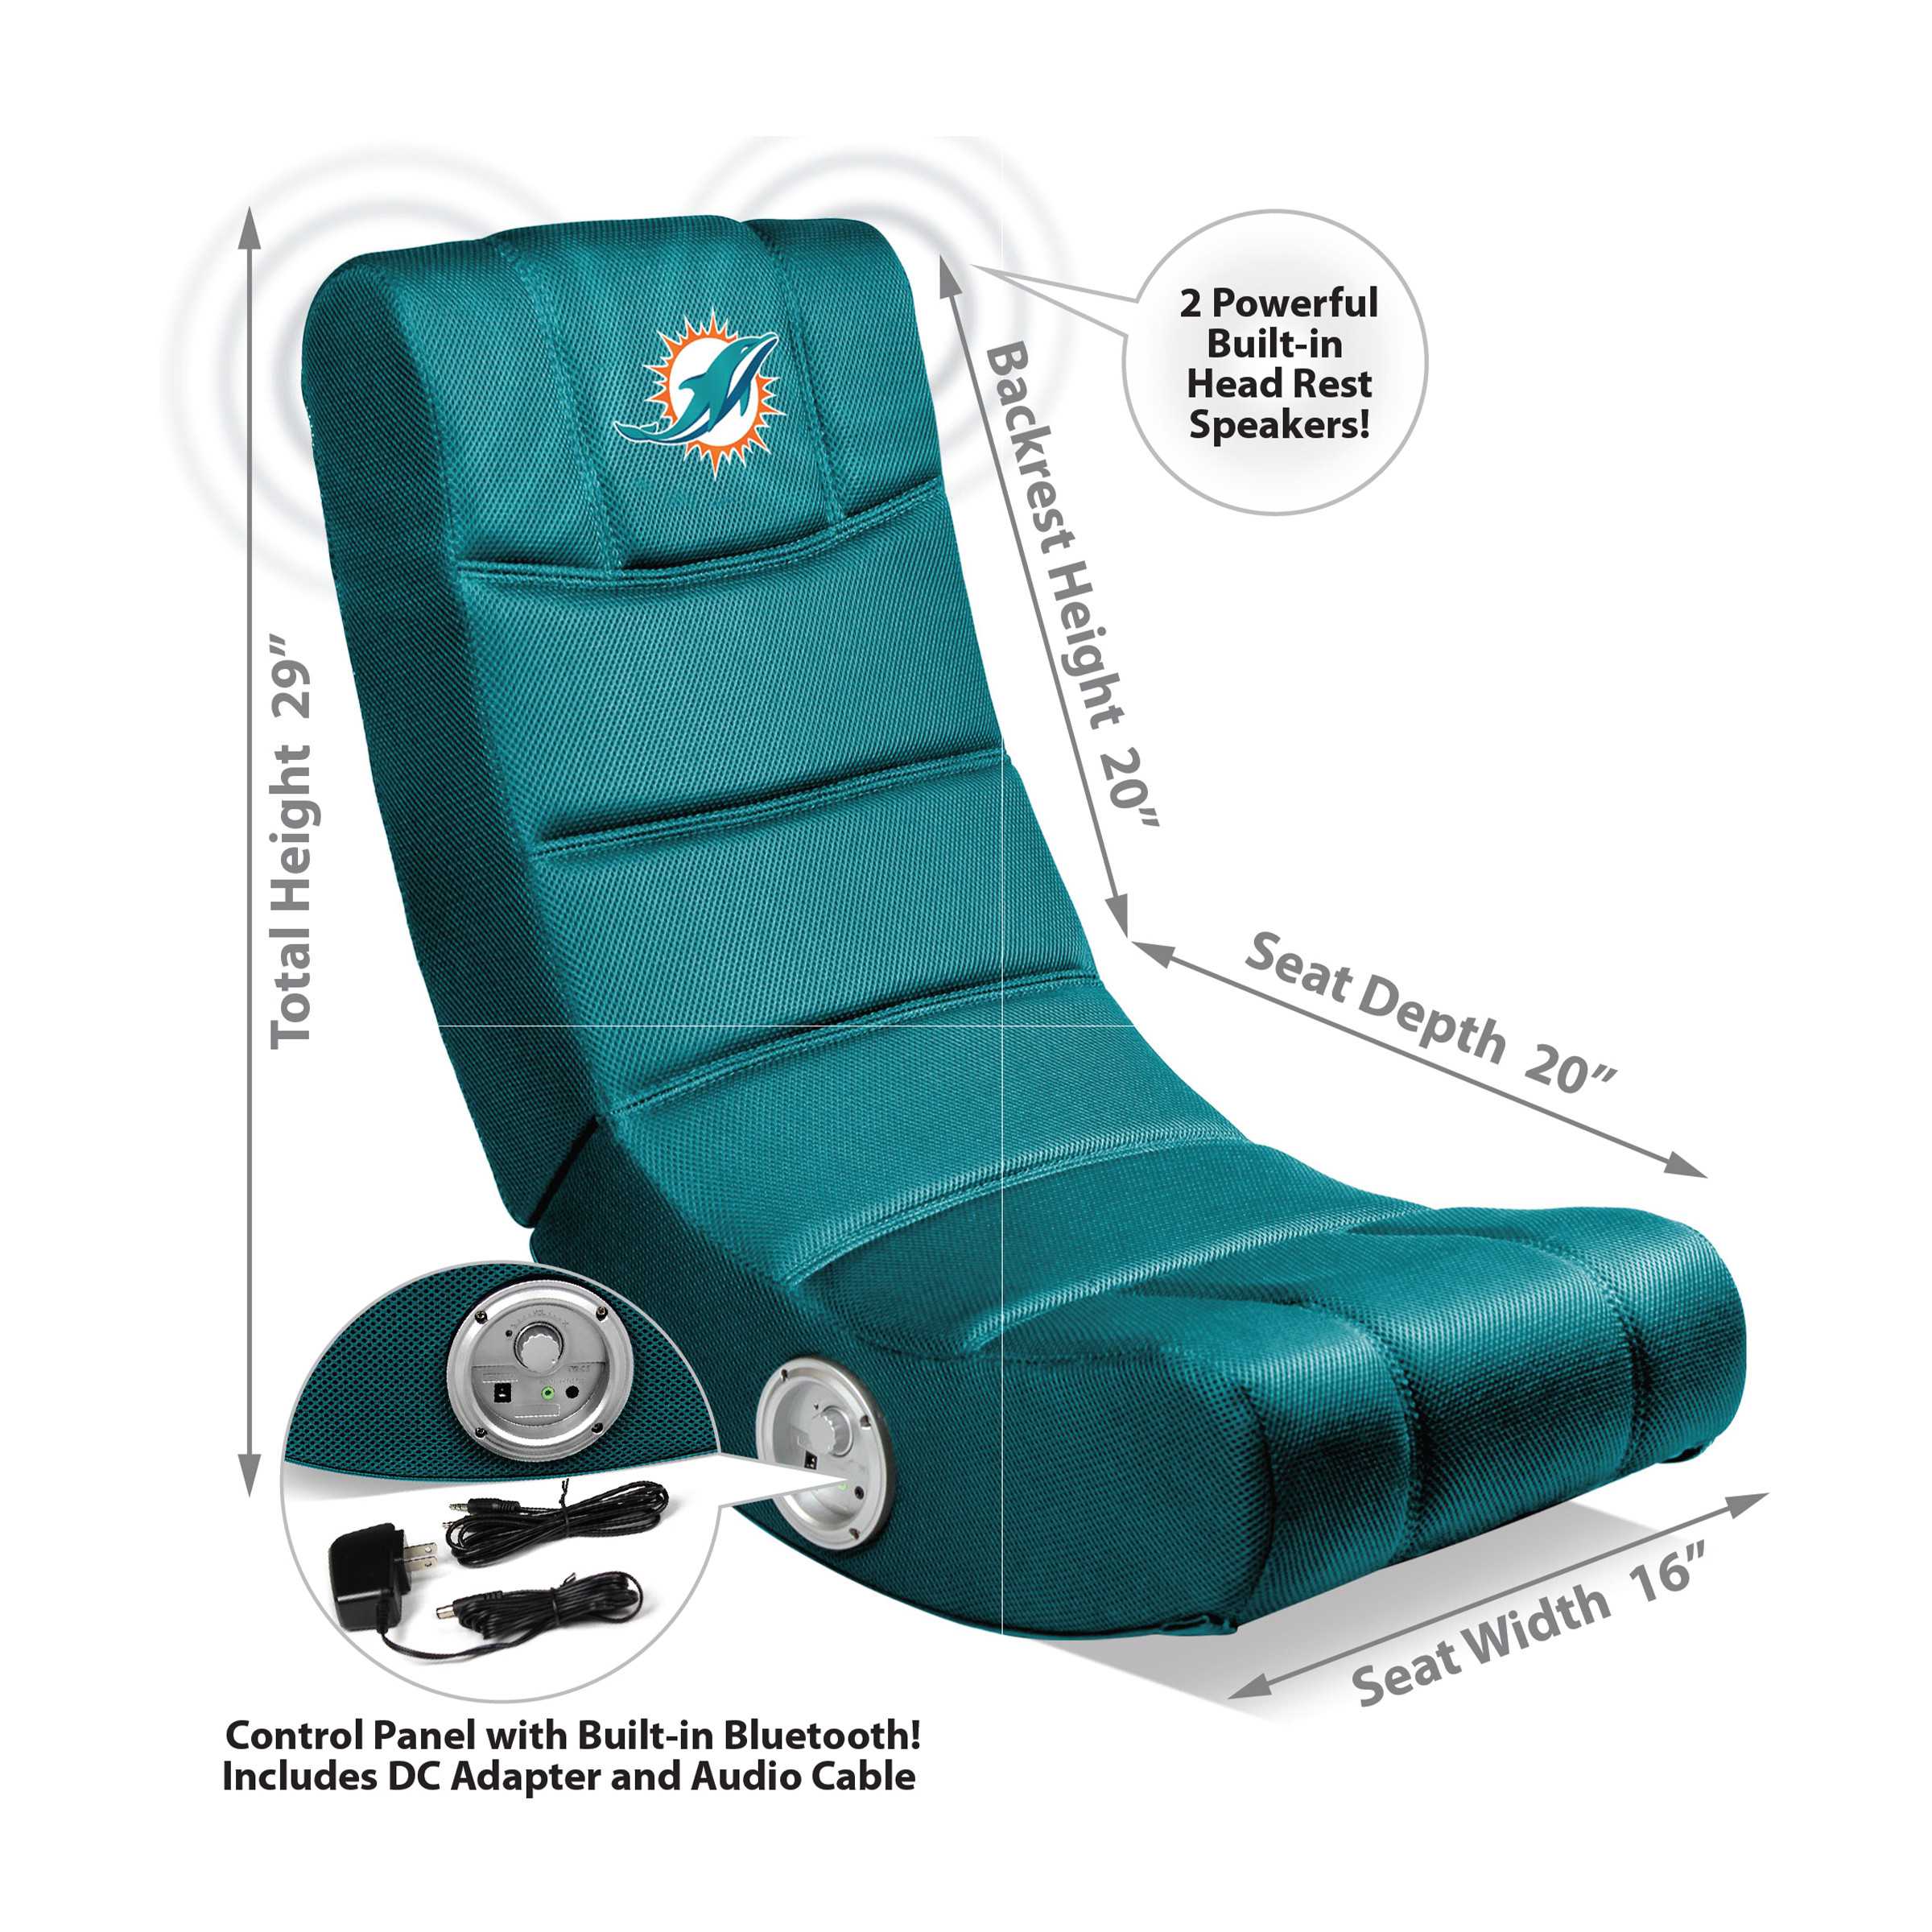 Miami Dolphins Video Chair W/ Blue Tooth